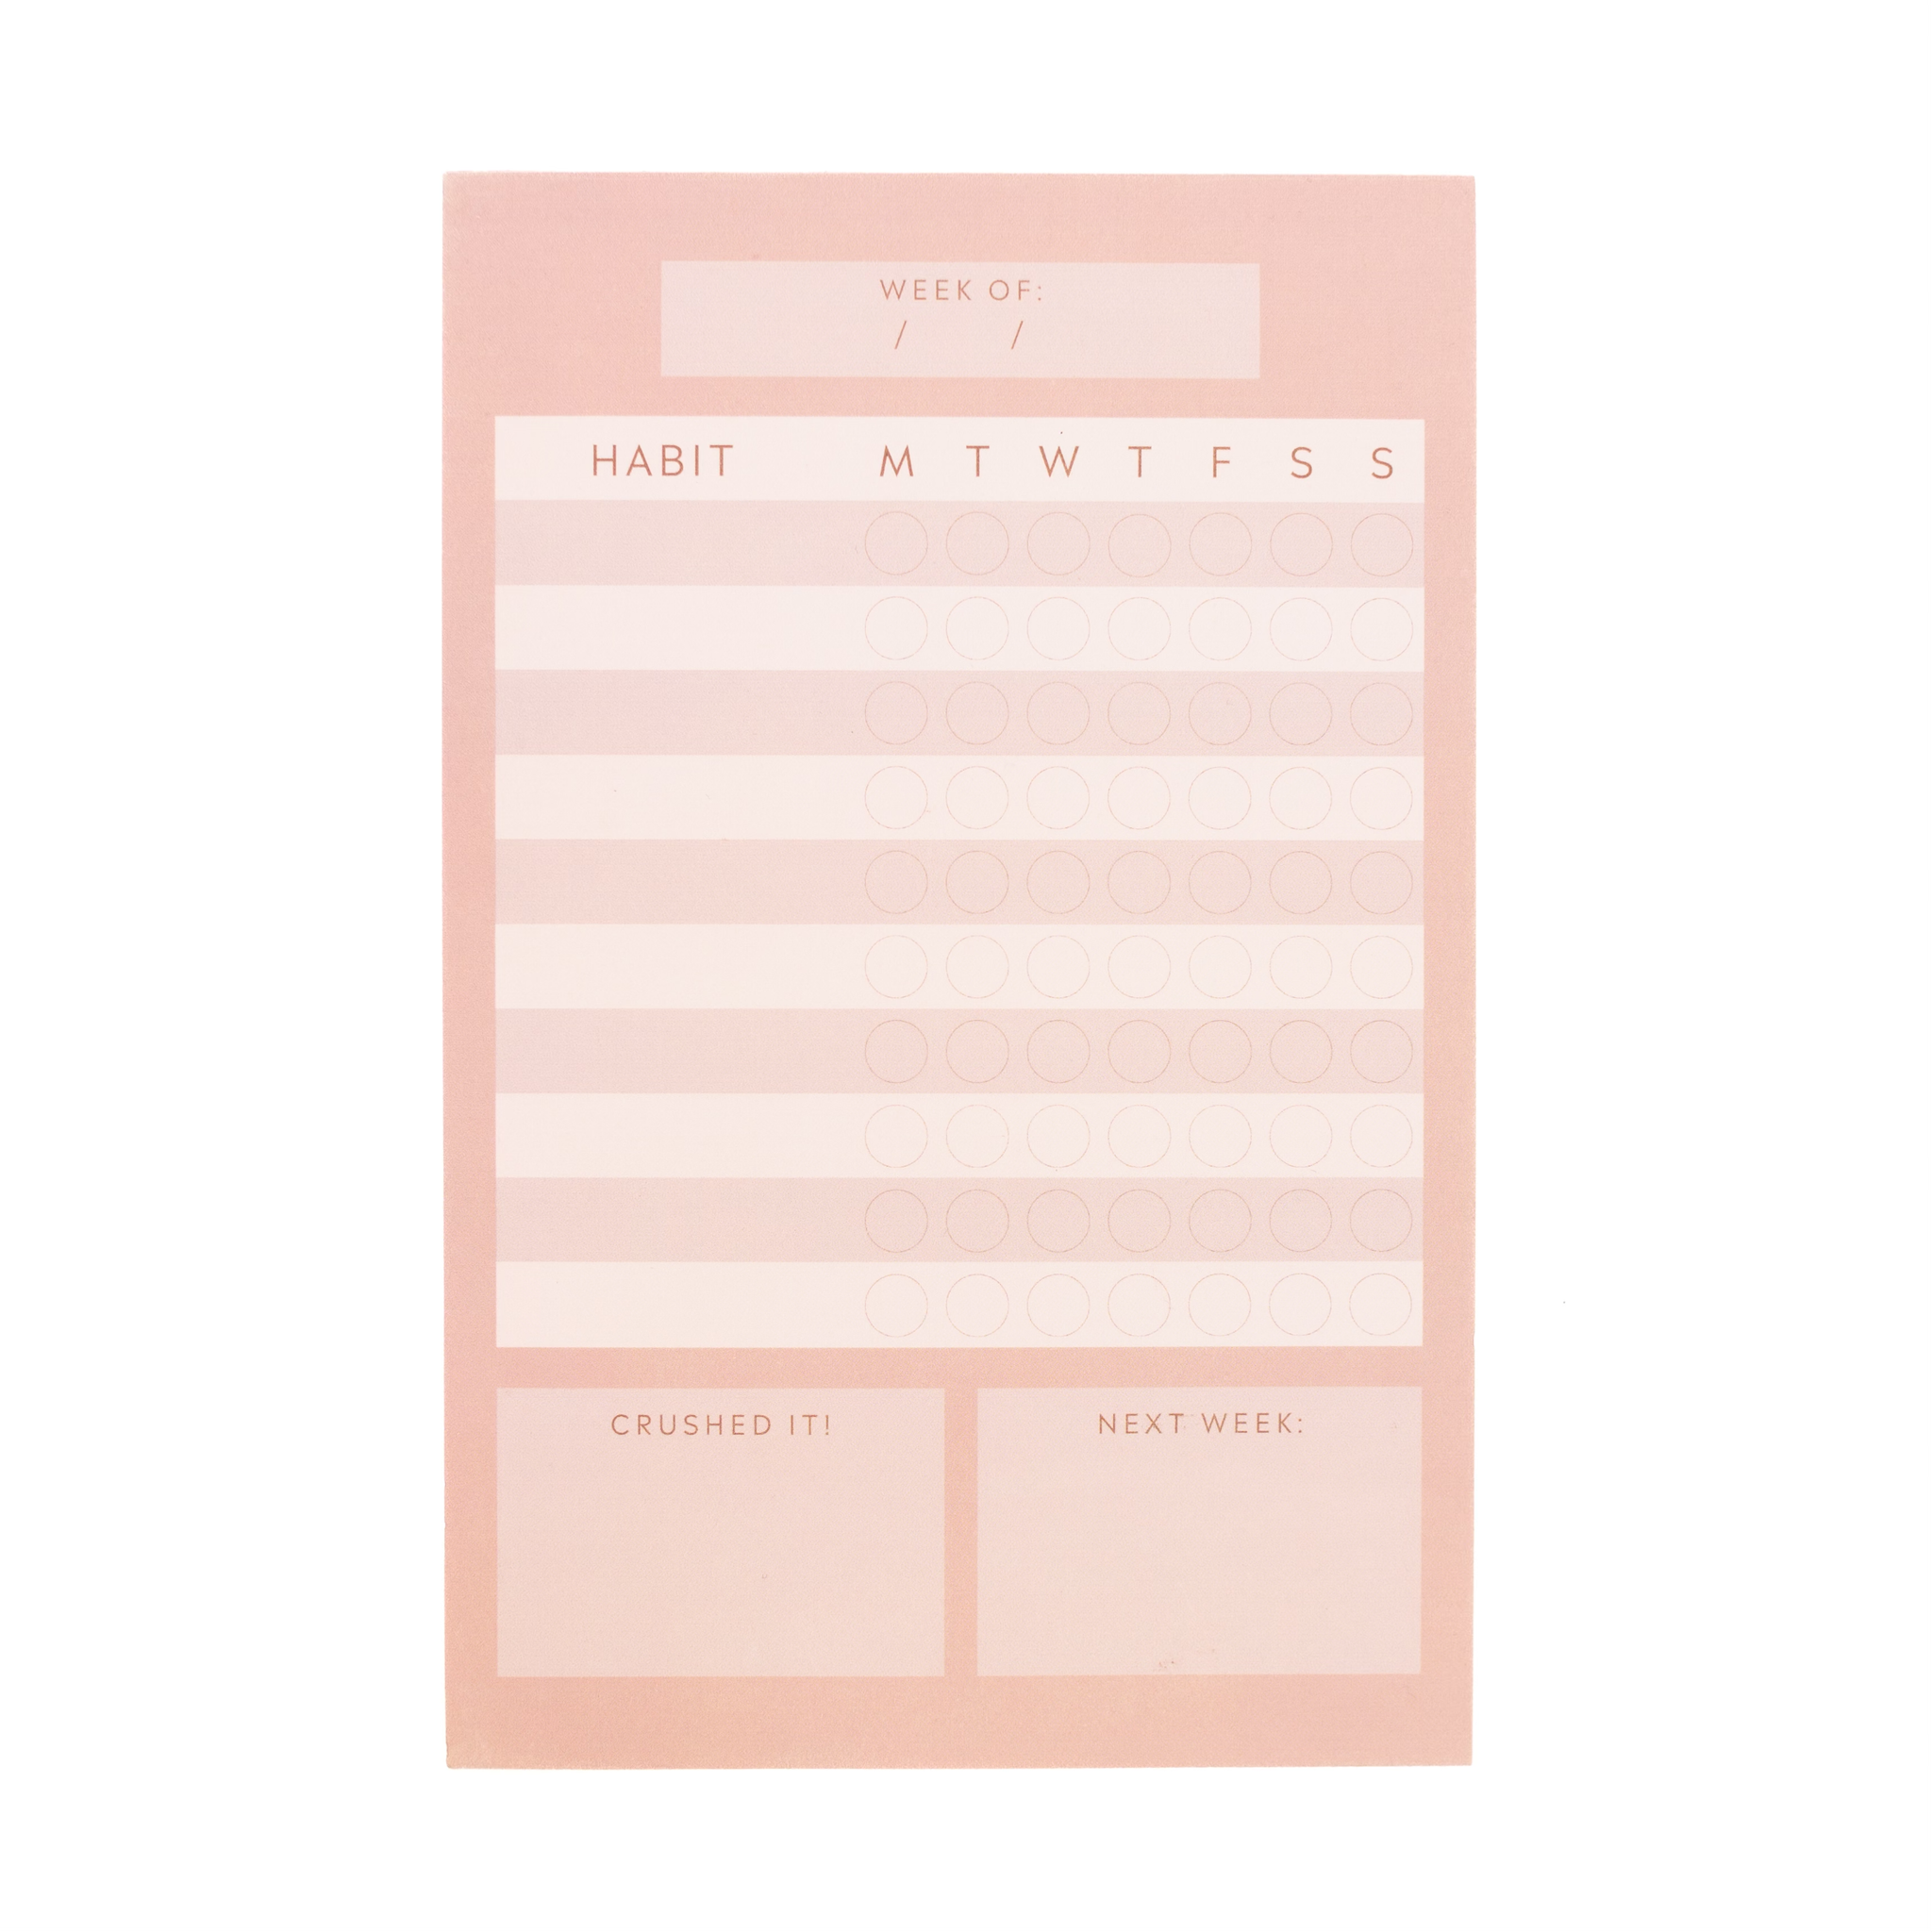 Use our new habit tracker as a way to keep some focus on YOU this season, too! Perfect for entering the new year, keep track of all the new habits you'd like to implement in your life. There's a space for a weekly pat-on-the-back and room for improvement too!